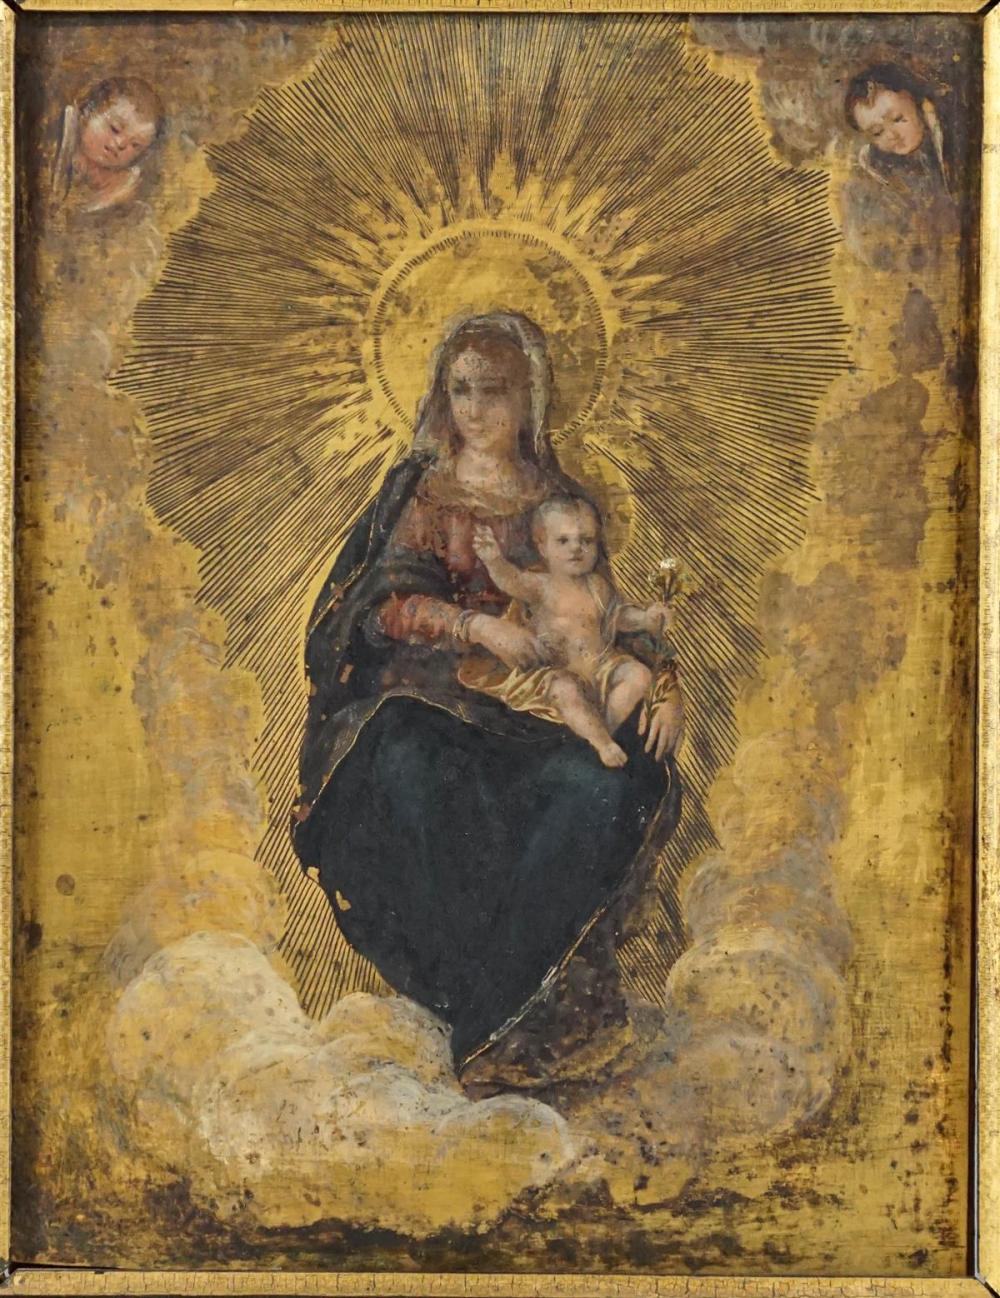 (18TH/19TH CENTURY) MADONNA AND